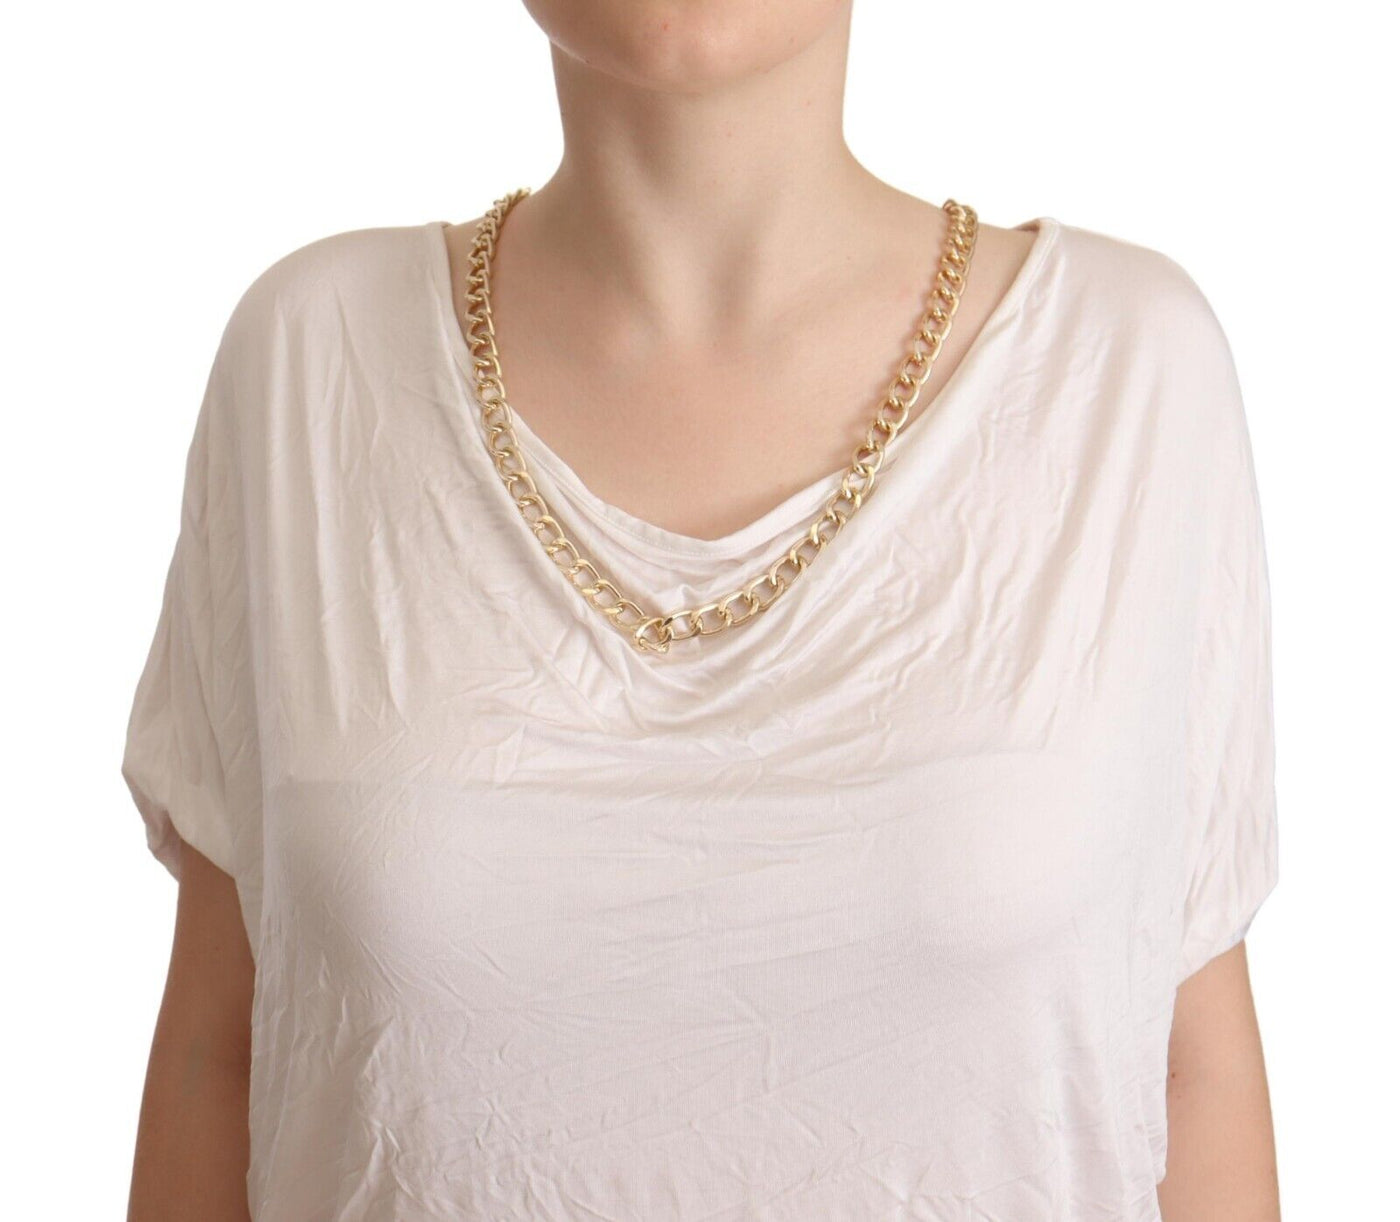 Guess By Marciano White Short Sleeves Gold Chain T-shirt Top